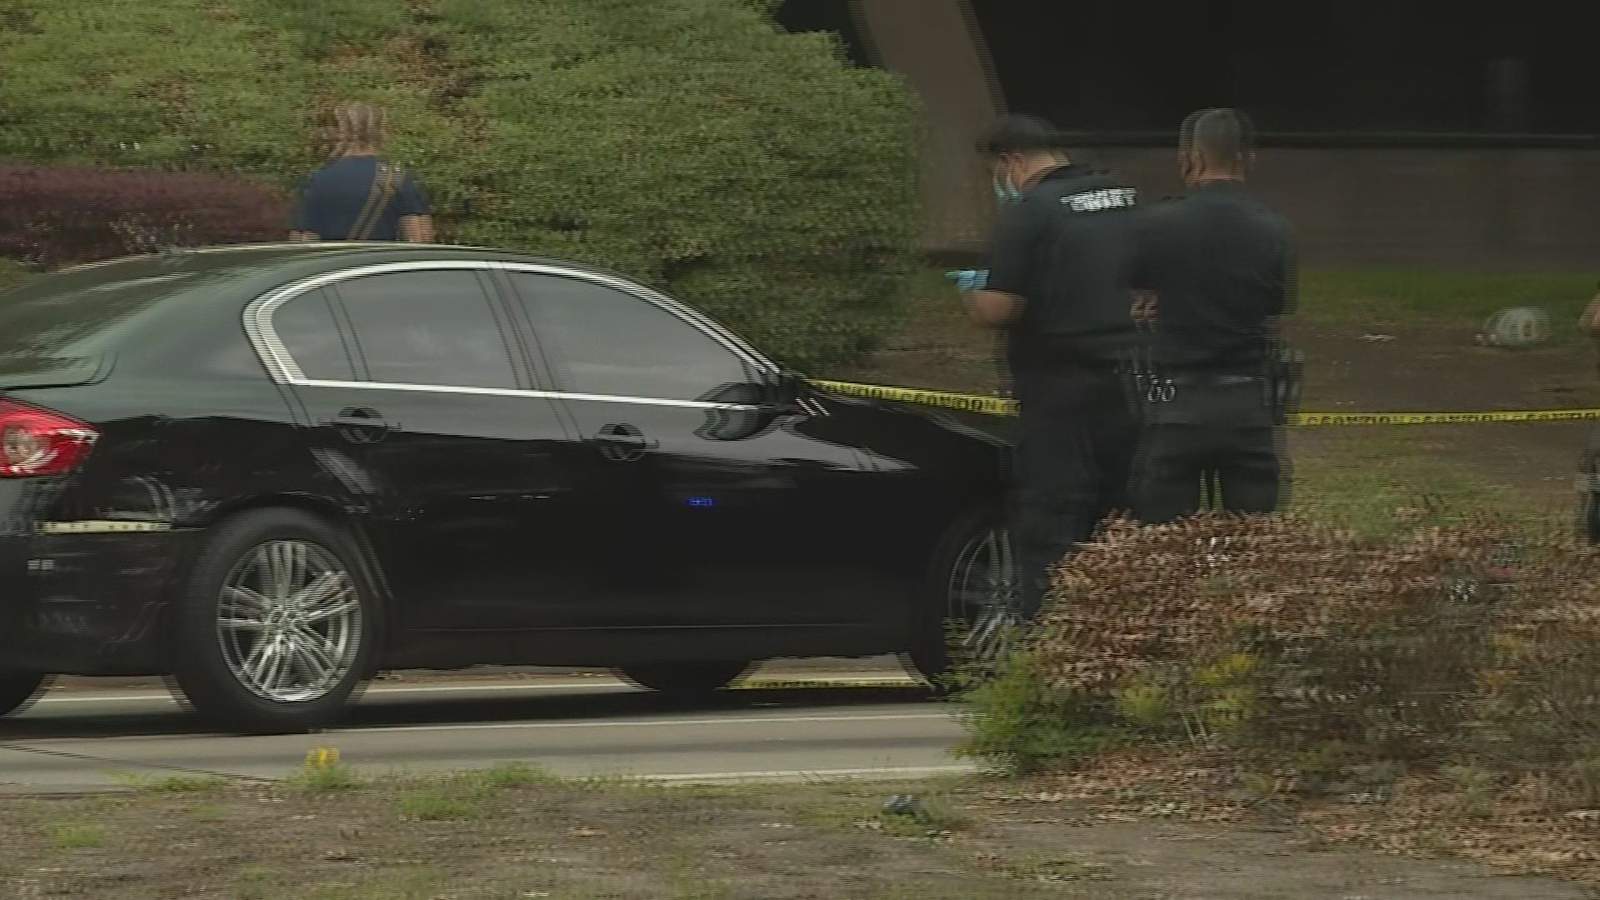 Police investigate after pregnant woman killed in shooting in West Houston